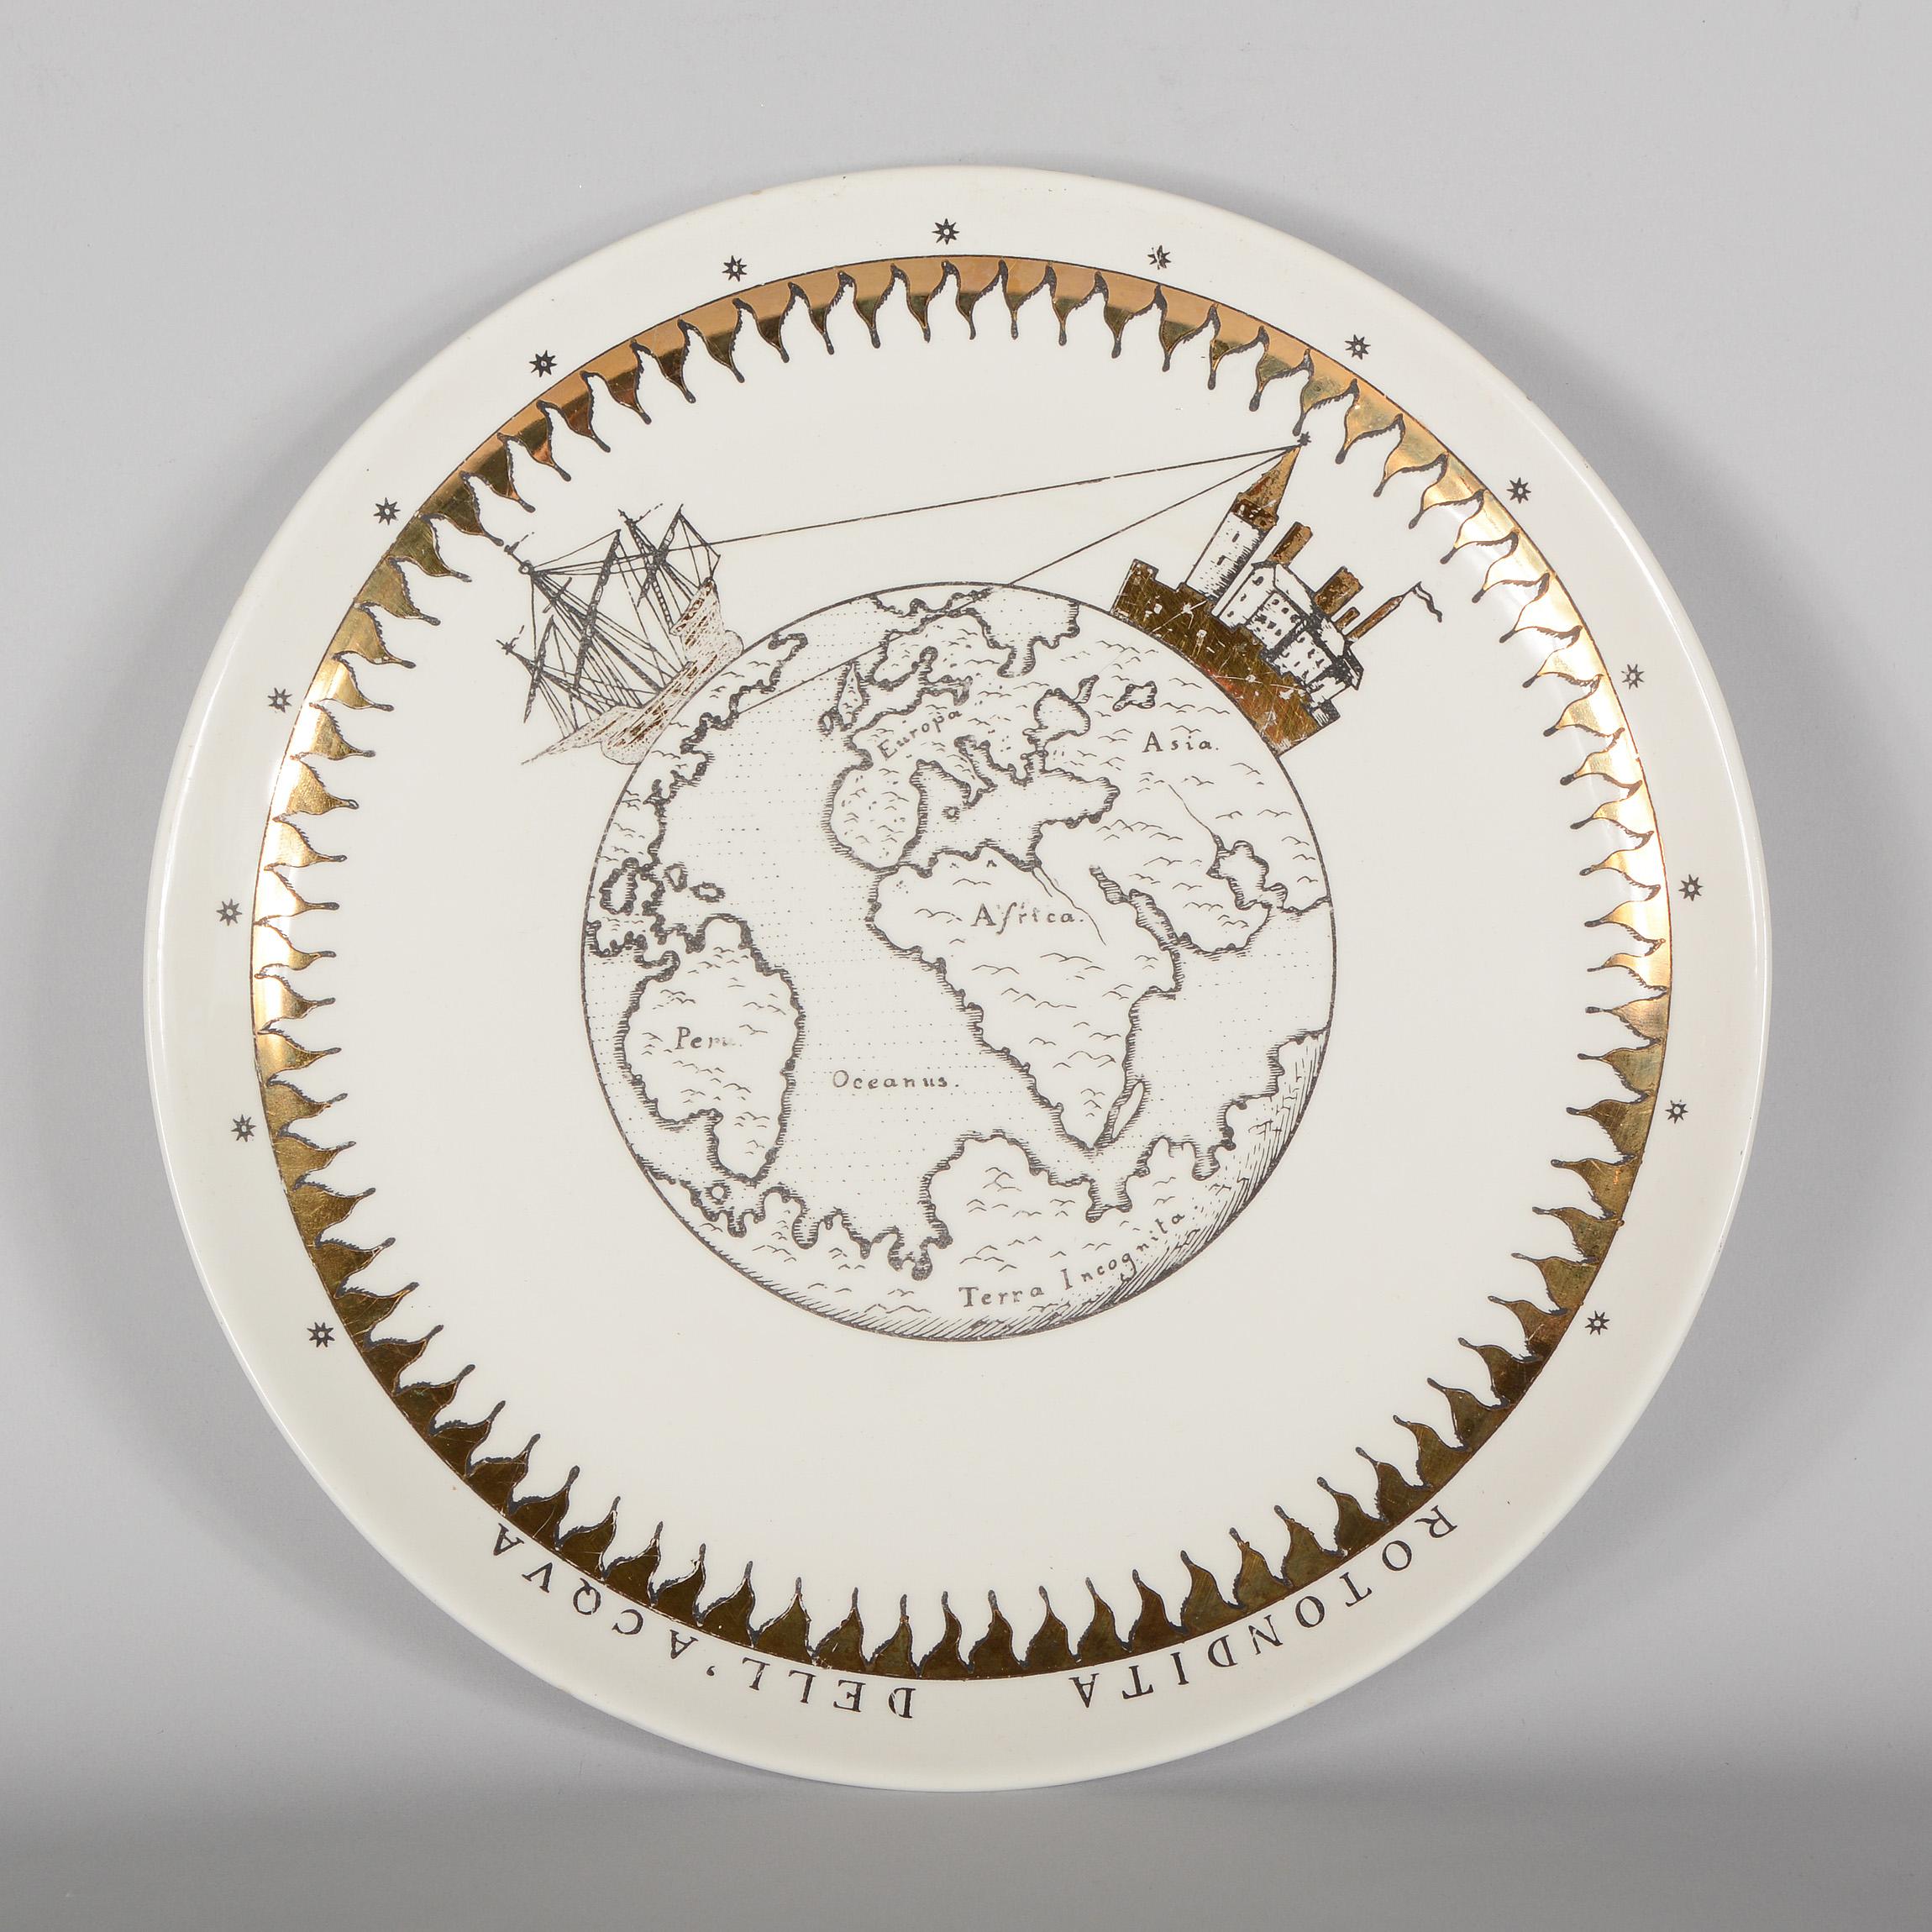 Porcelain Three Plates from the Astronomici Series by Piero Fornasetti